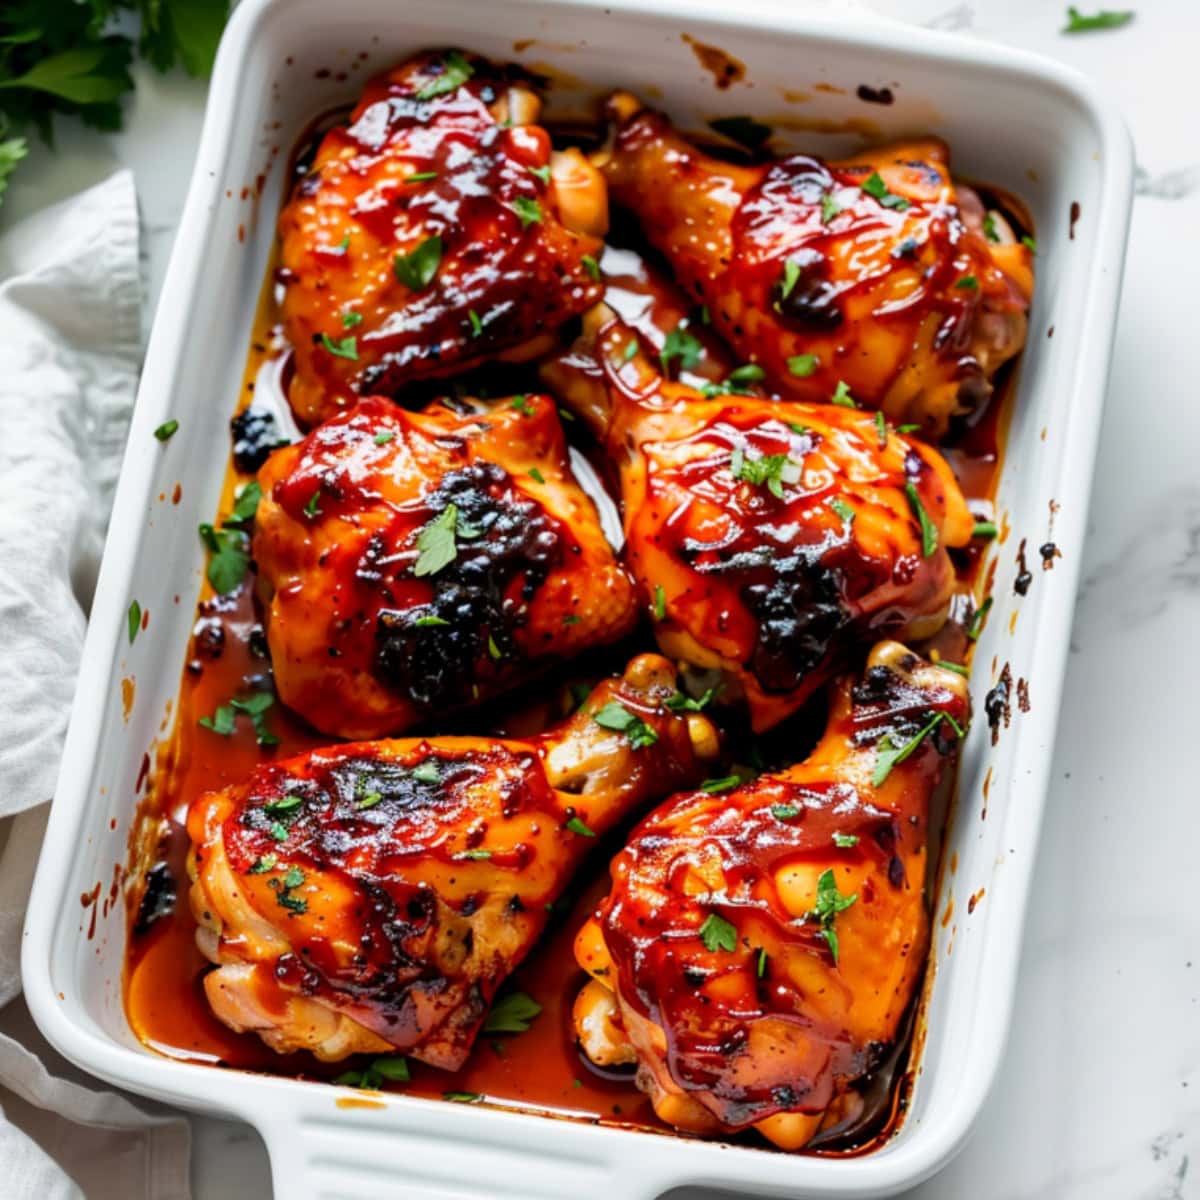 Chicken Drumsticks and thighs covered in bbq marinade in a baking dish.